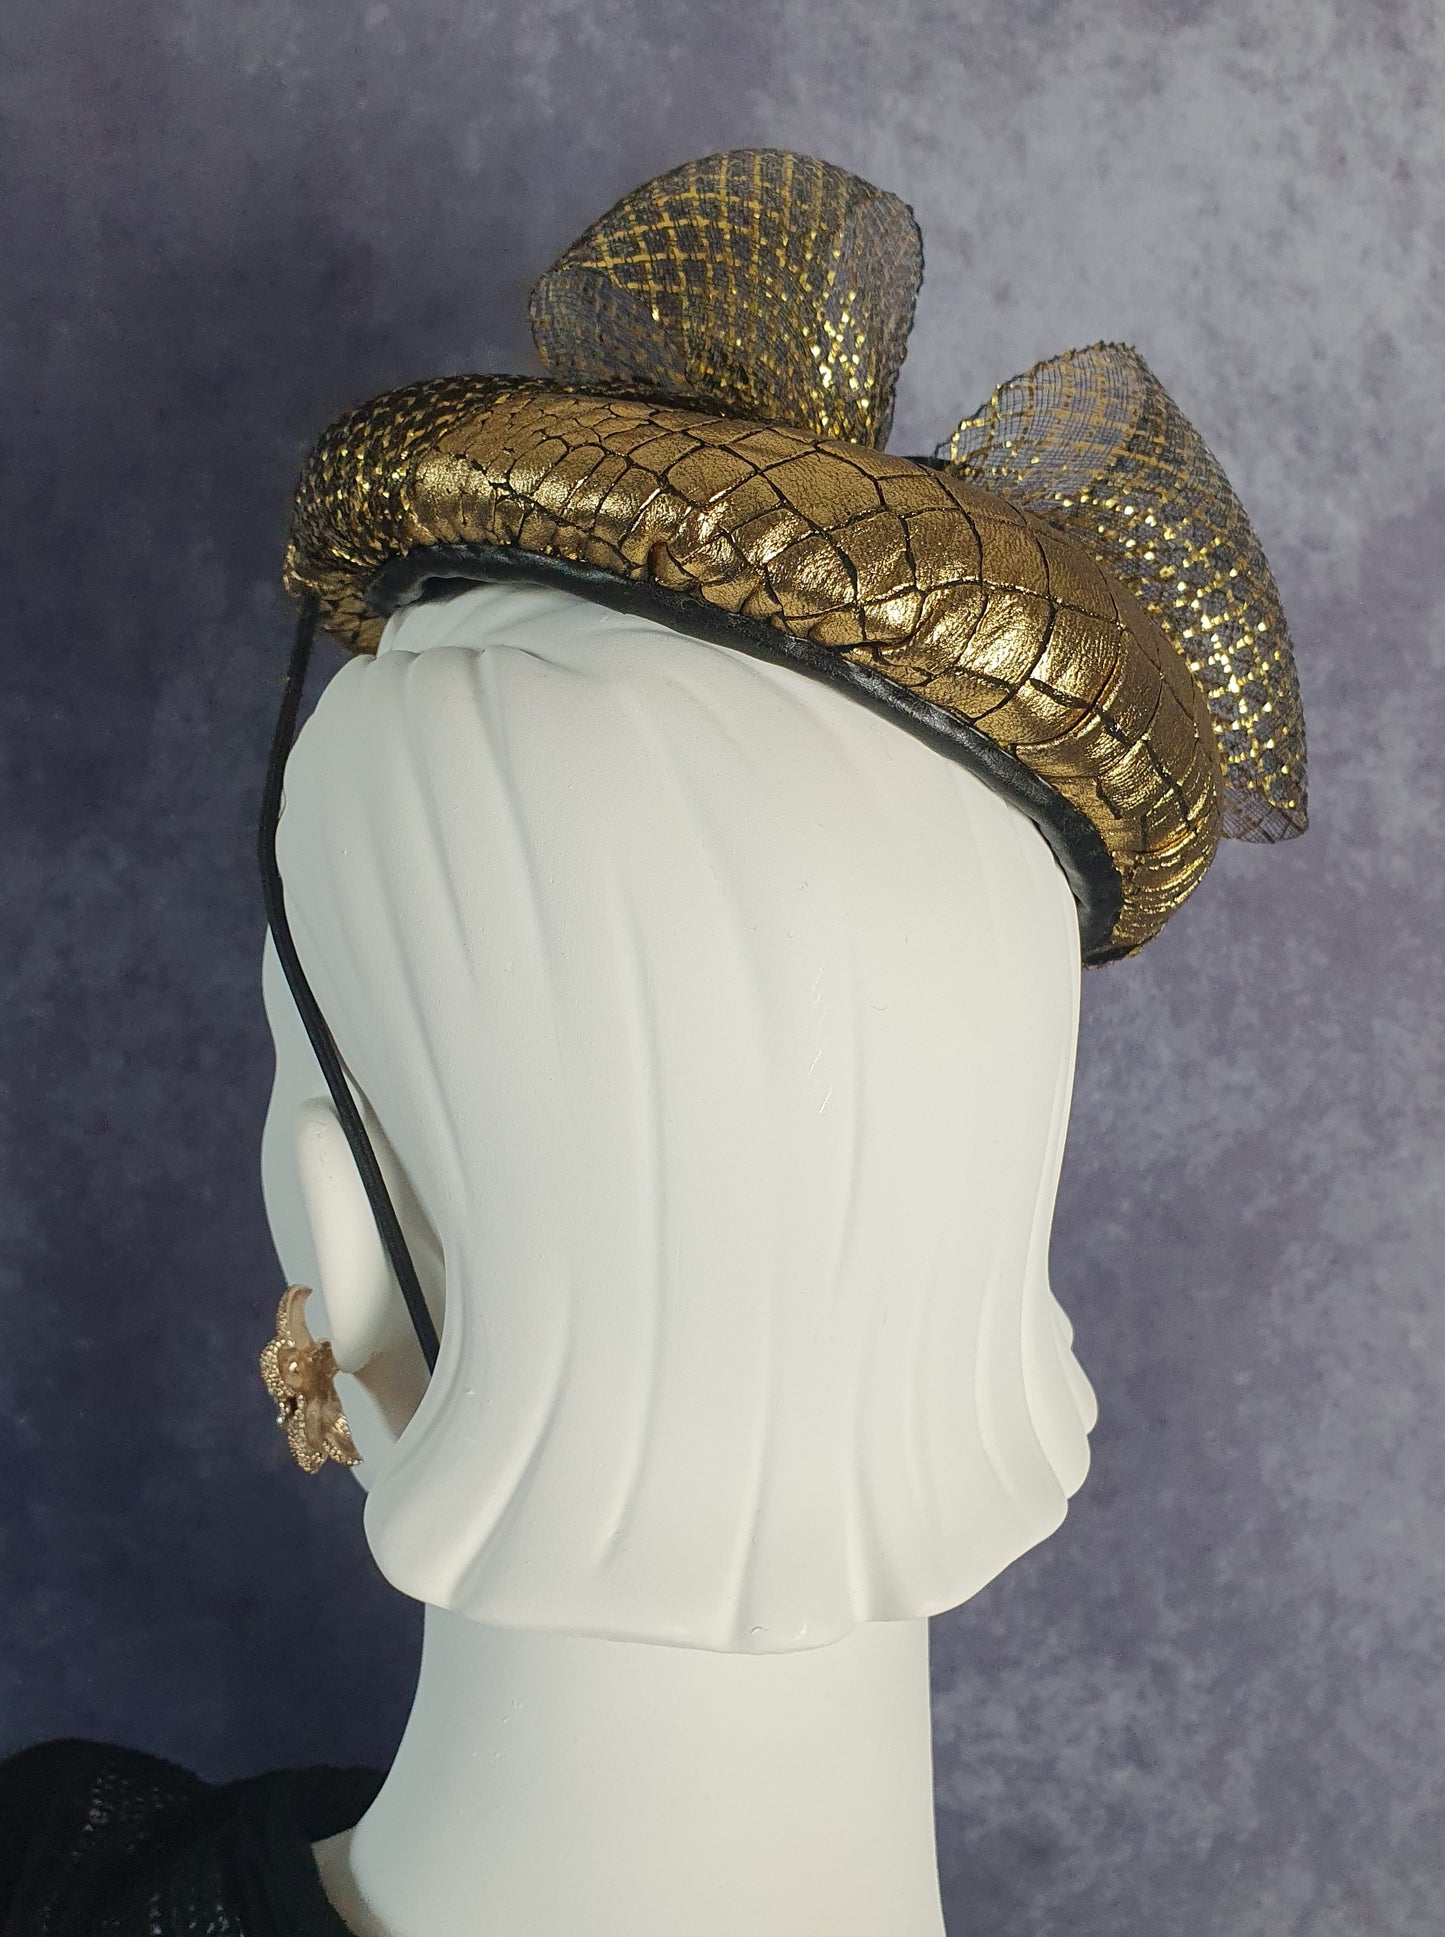 Fascinator handmade in gold leather with black, wedding headdress, elegant women's hat for a special occasion